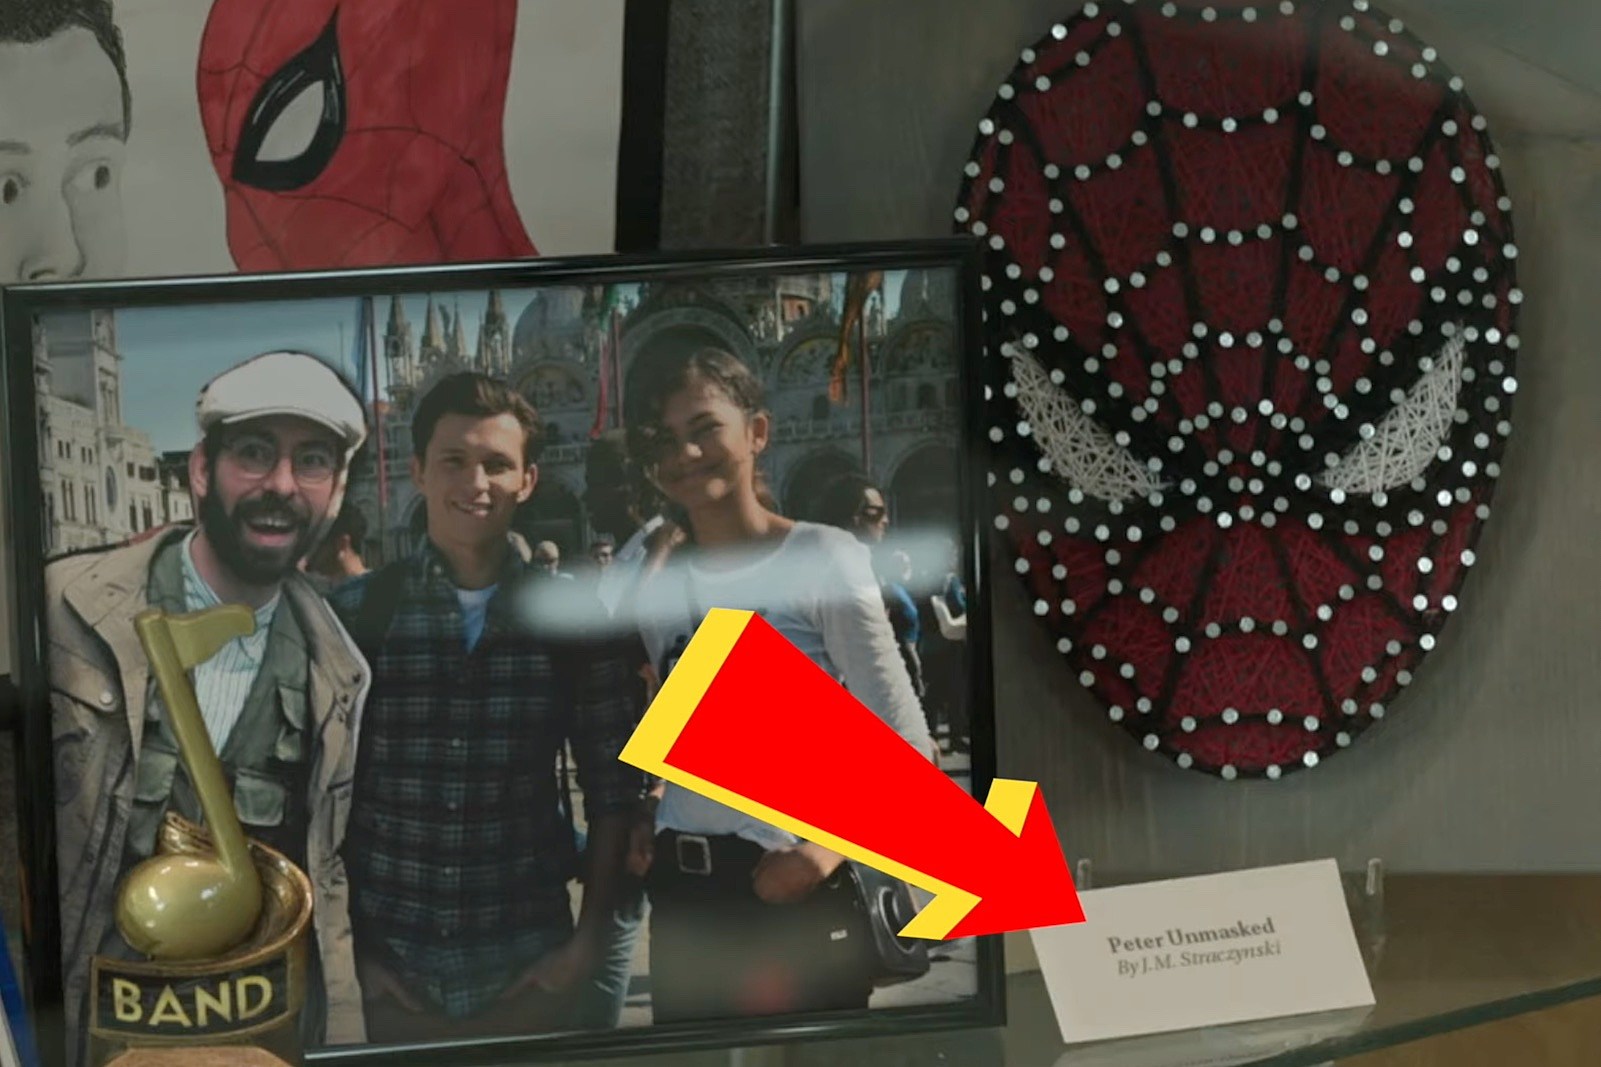 Spider-Man 2's adorable Easter egg reminds us to play indie games - Polygon